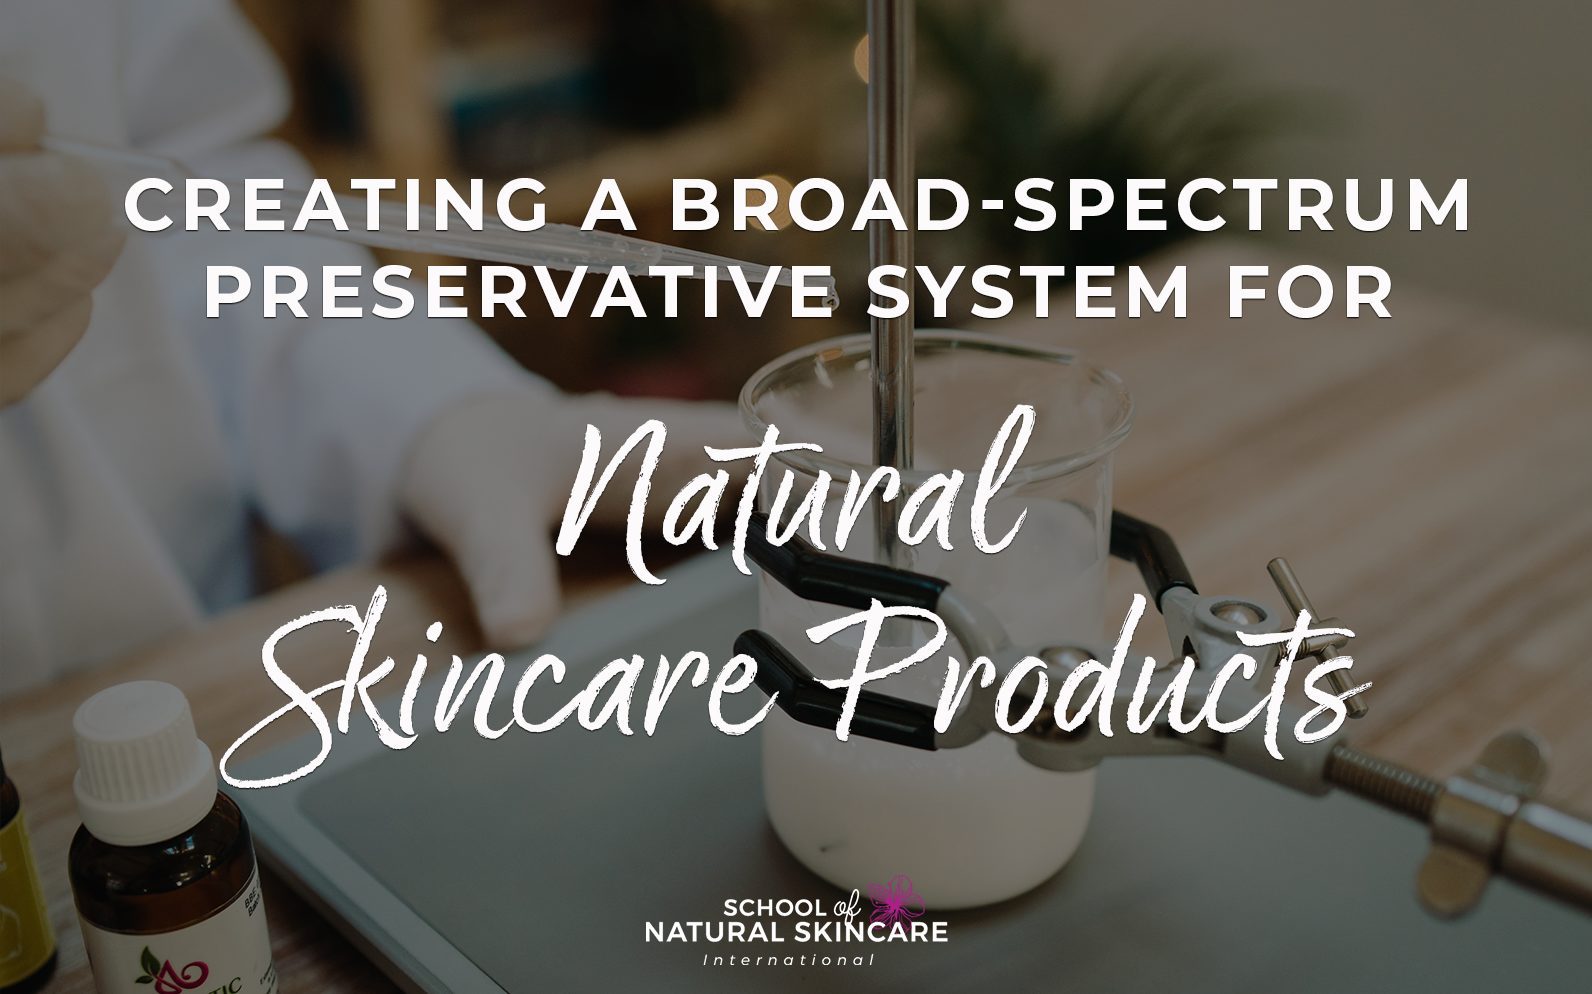 Creating a Broad-spectrum Preservative System for Natural Skincare Products  - School of Natural Skincare